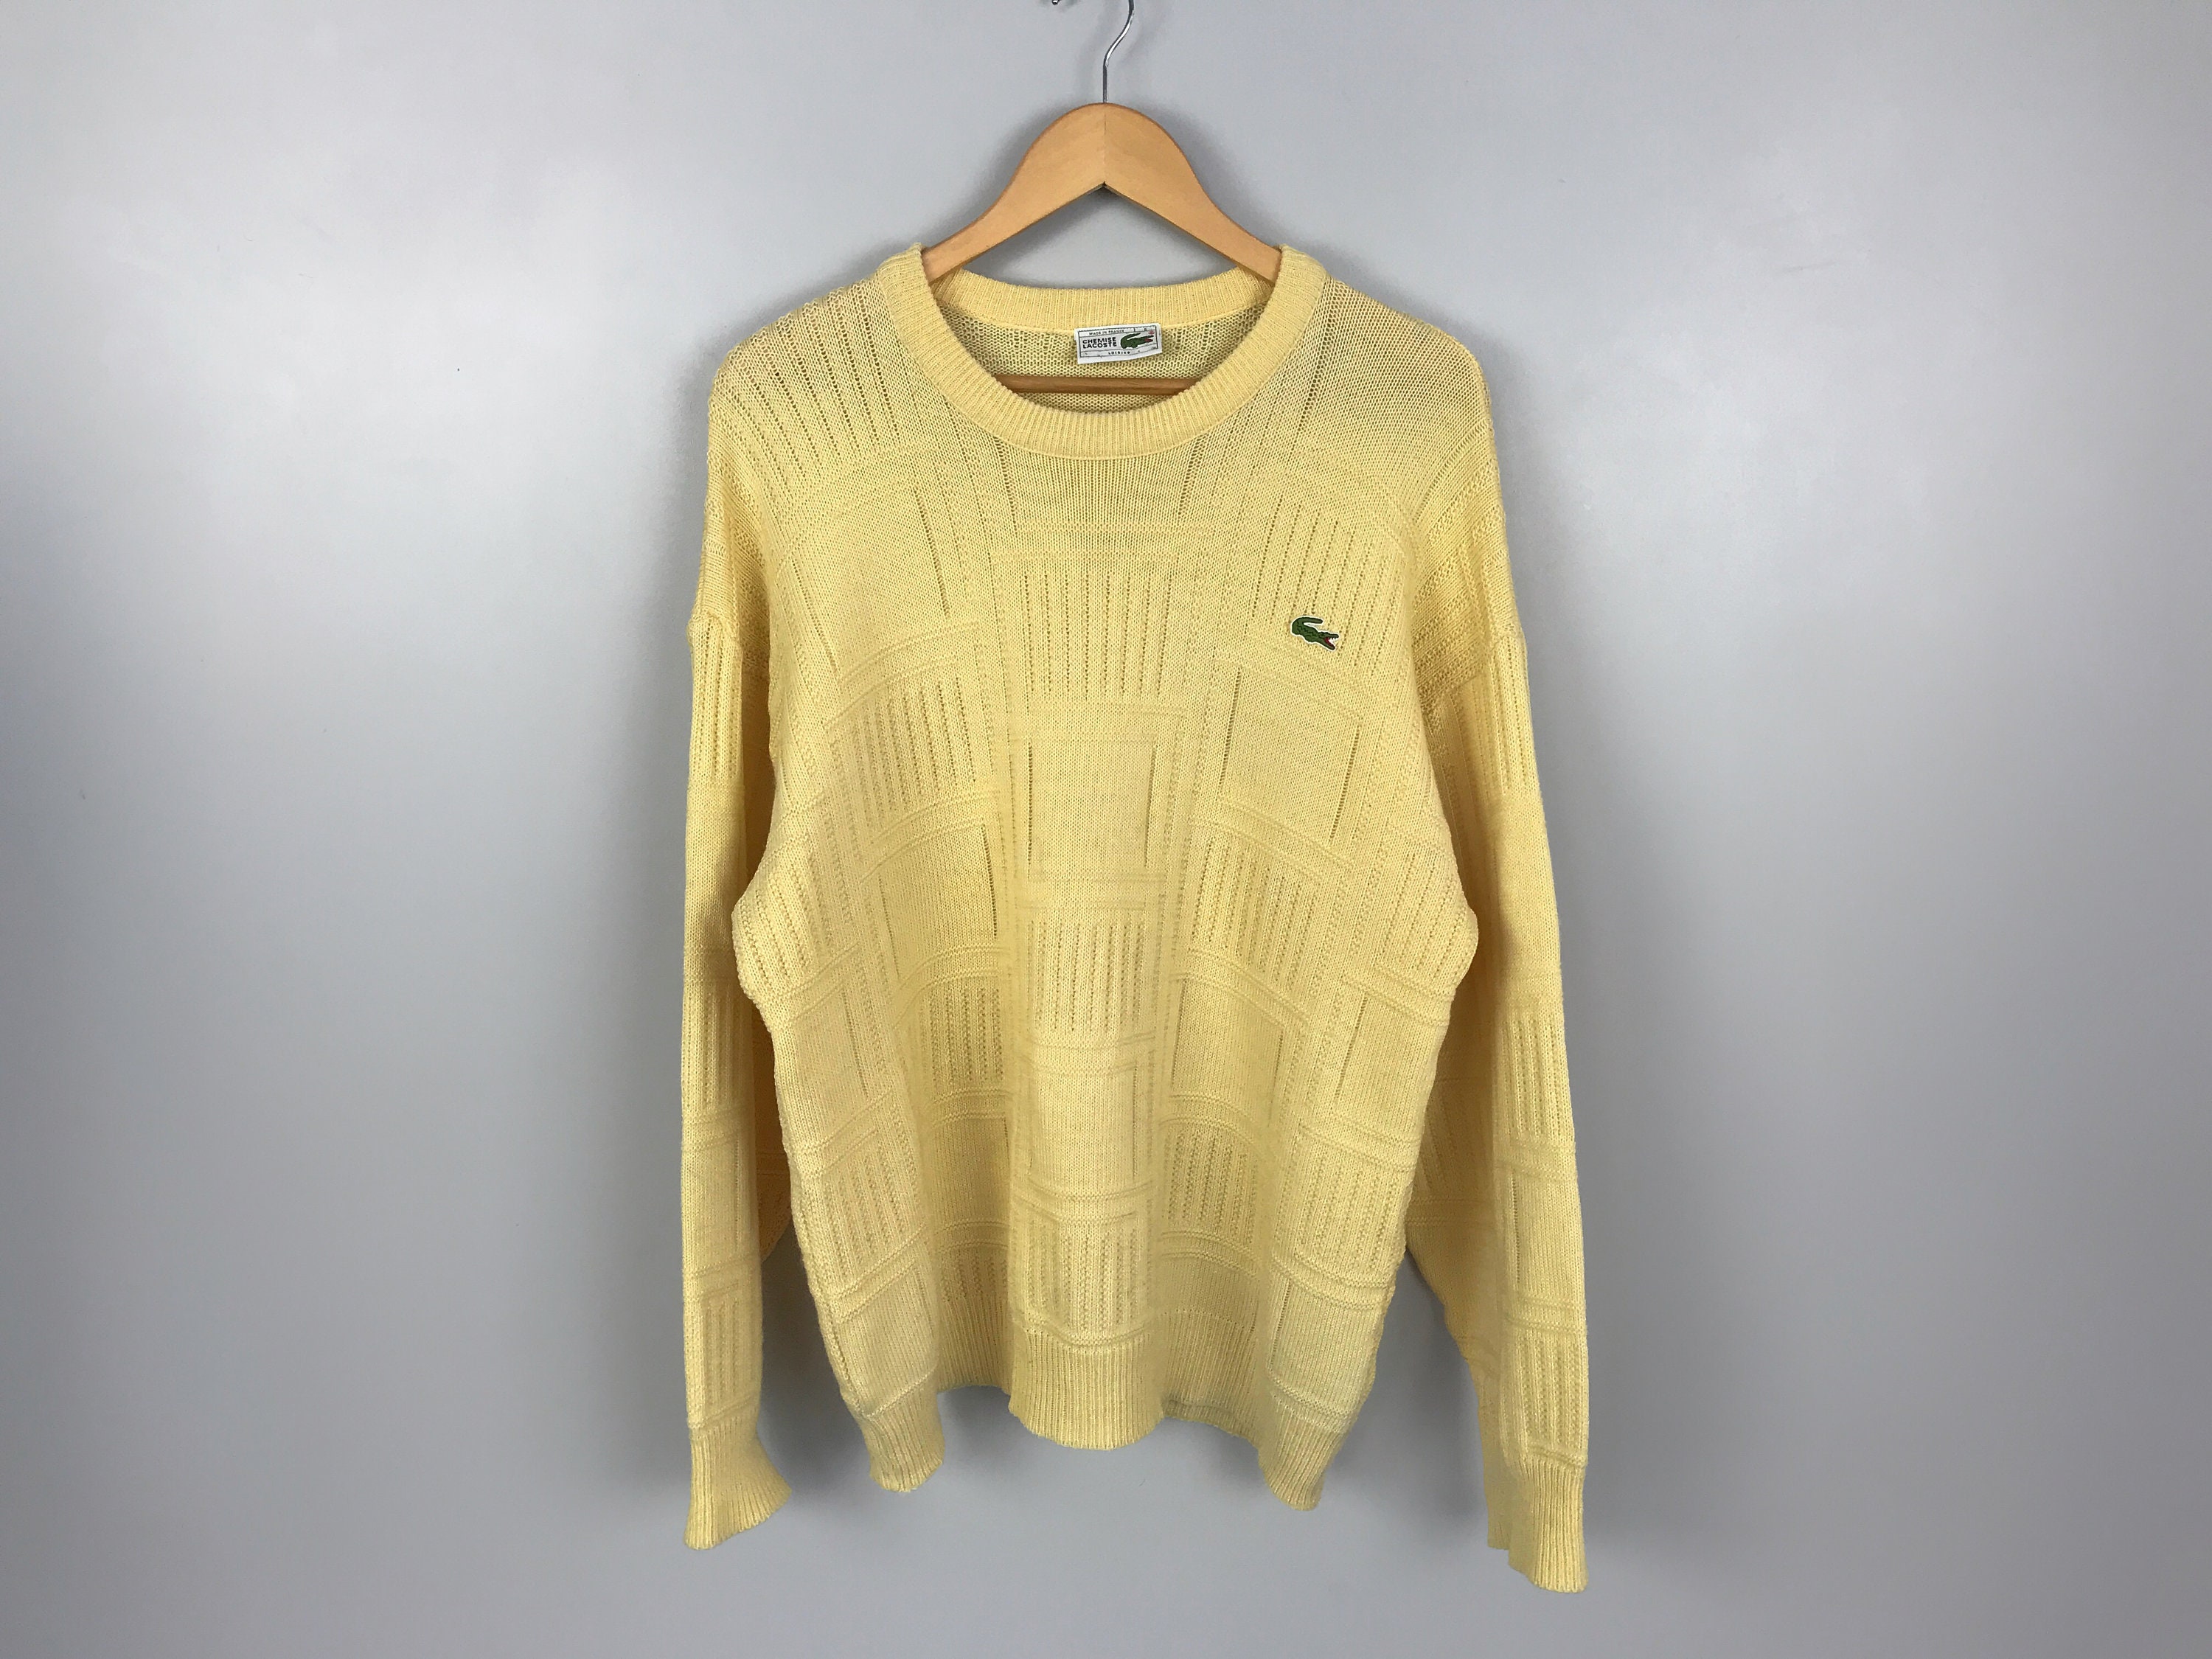 Vintage CHEMISE LACOSTE Loisirs Made in France Pullover Knit Geometric  Yellow Classic Grandpa Sweater Size 6 / L 